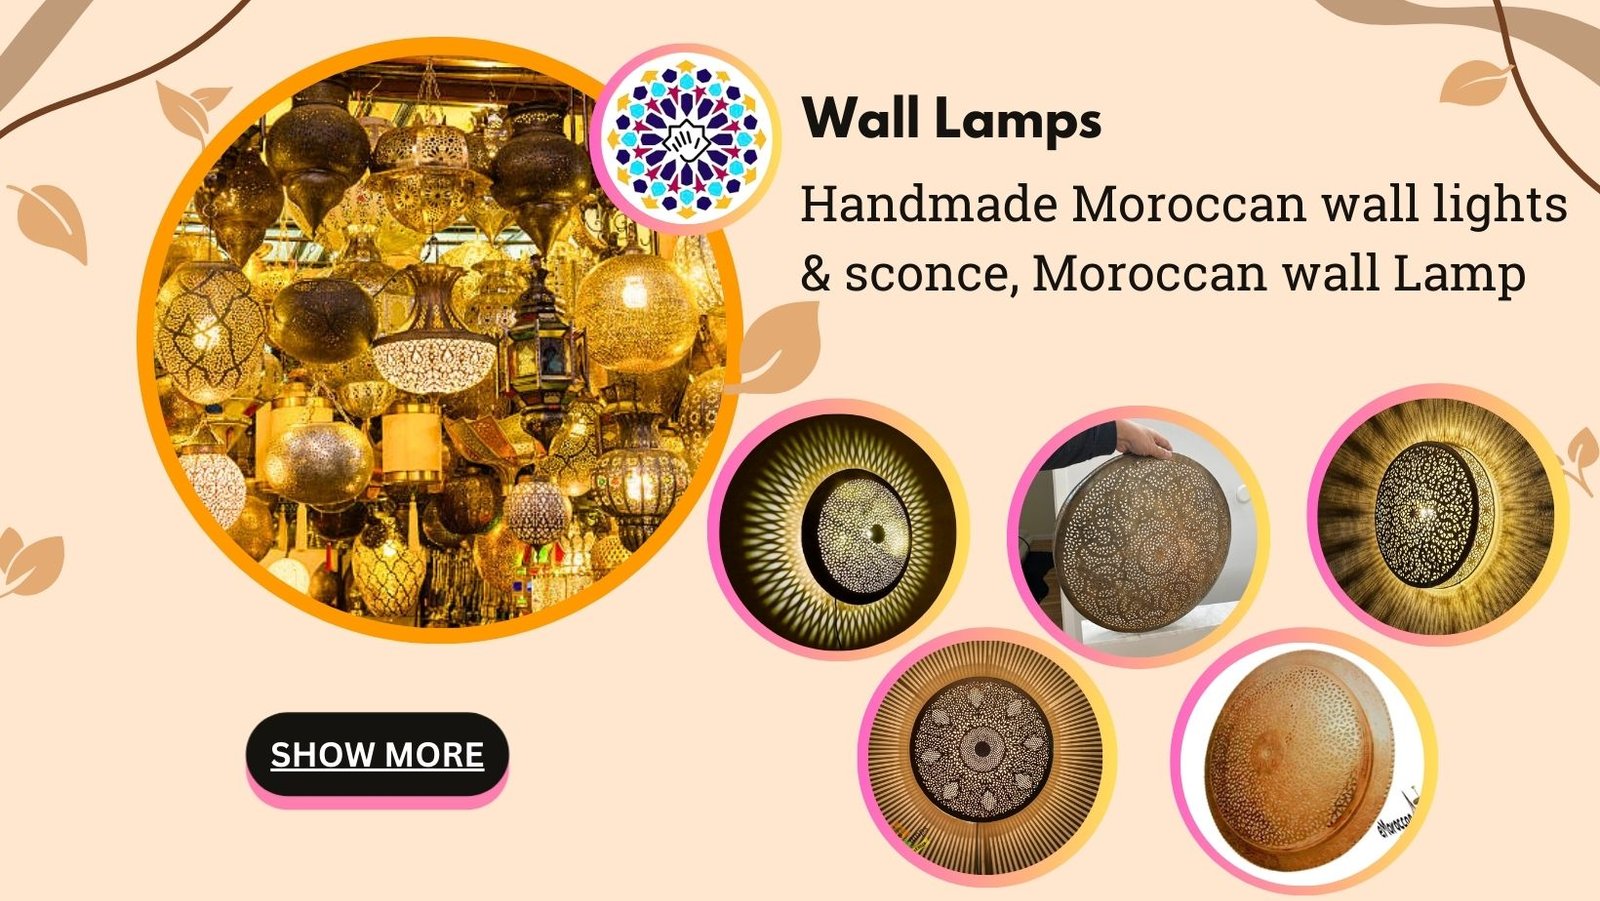 Wall Lamps Moroccan Wall Sconce Lamp Atlas Lights Moroccan Wall Lamps With its intricate design done by a local artisan in Marrakech